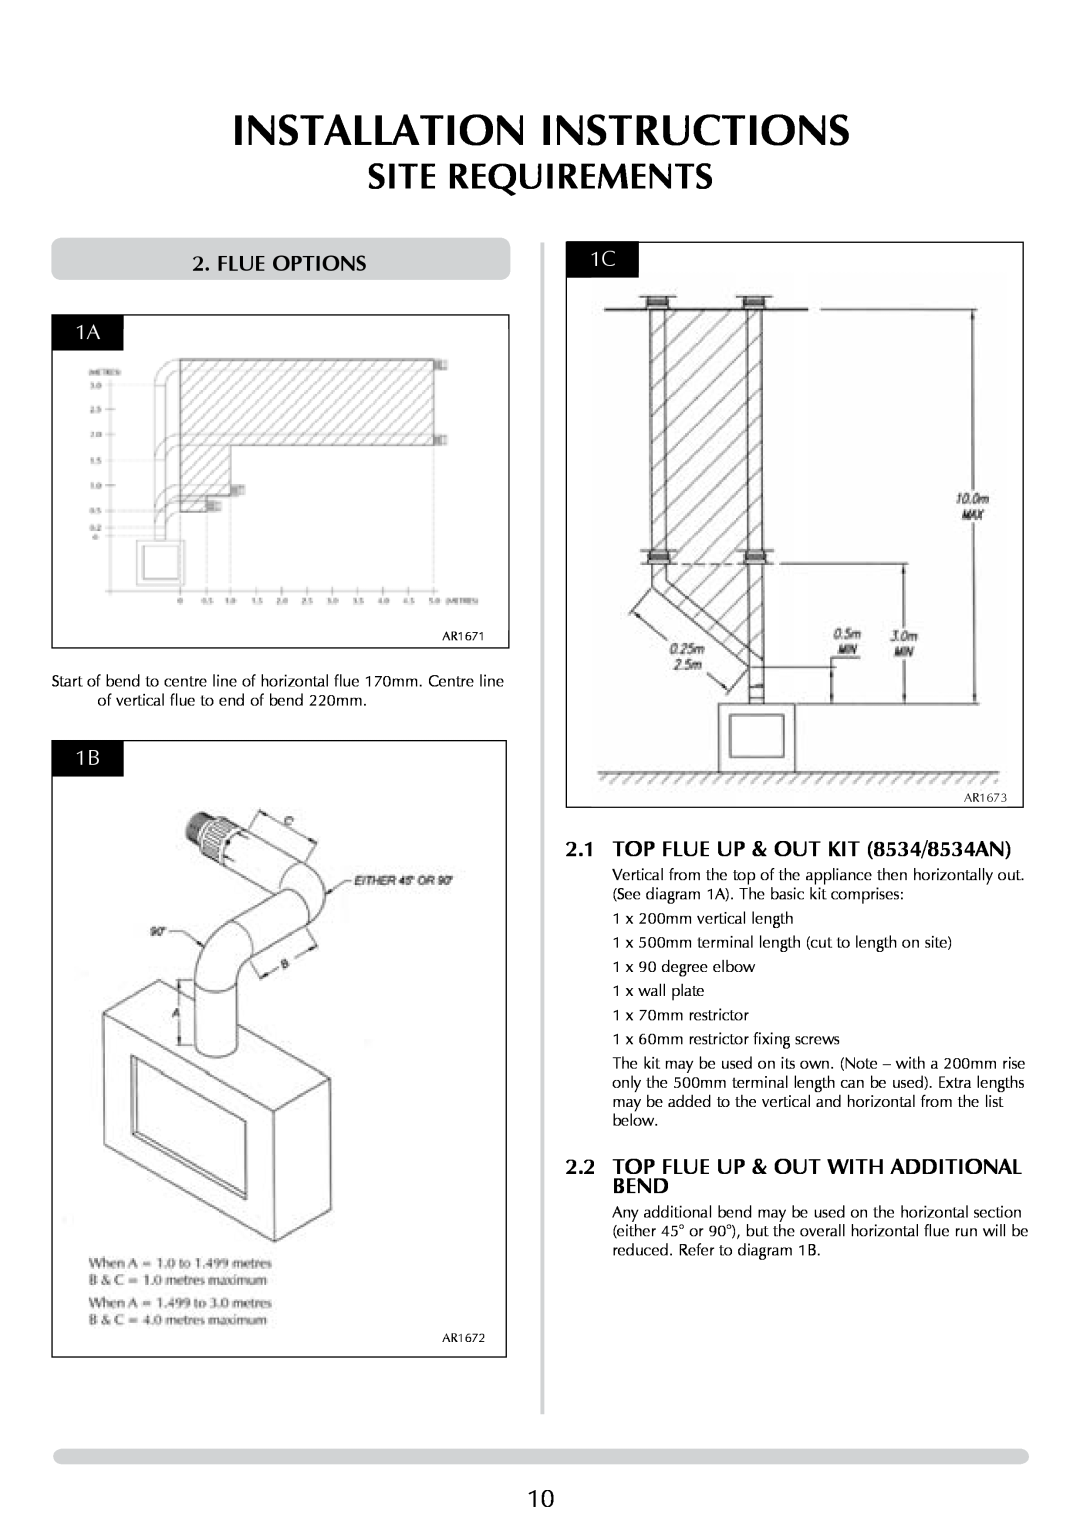 Stovax P8627 MA, 8627 BS Installation Instructions, Site Requirements, Flue Options, TOP FLUE UP & OUT KIT 8534/8534AN 